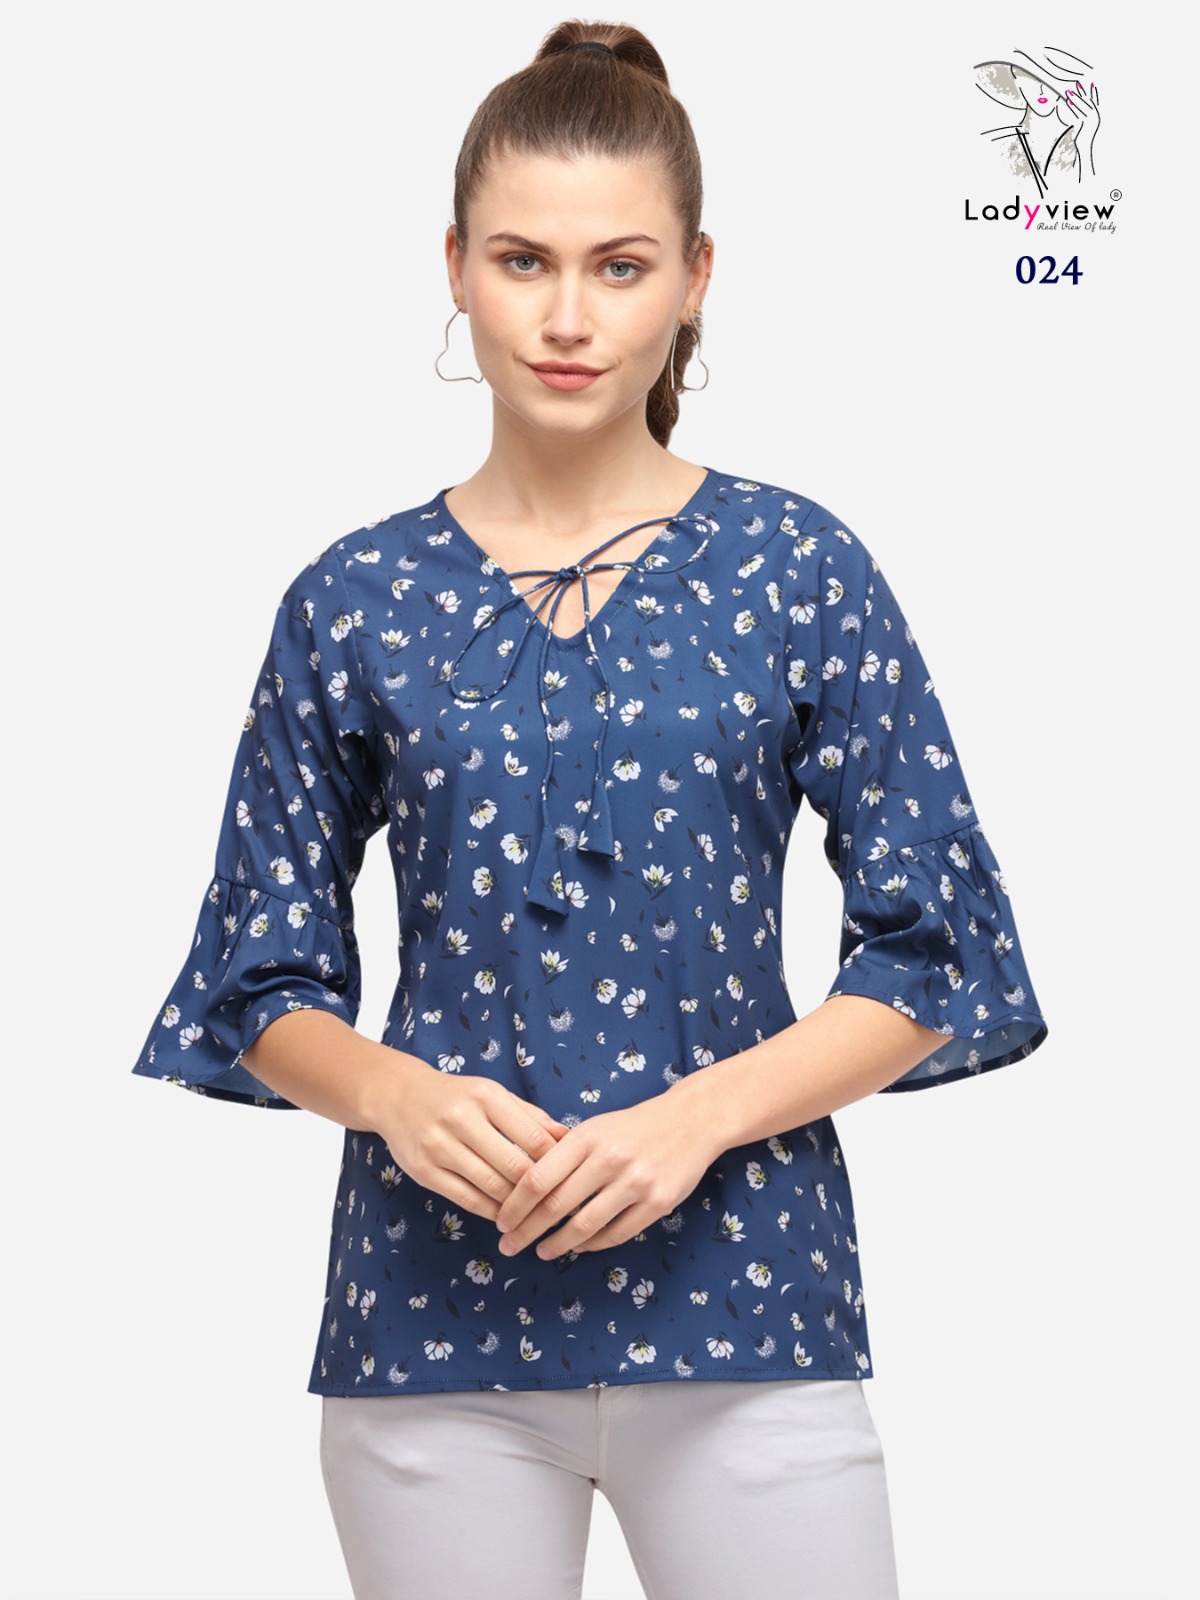 ladyview topsy remix 3 American Crape new and modern style tops catalog